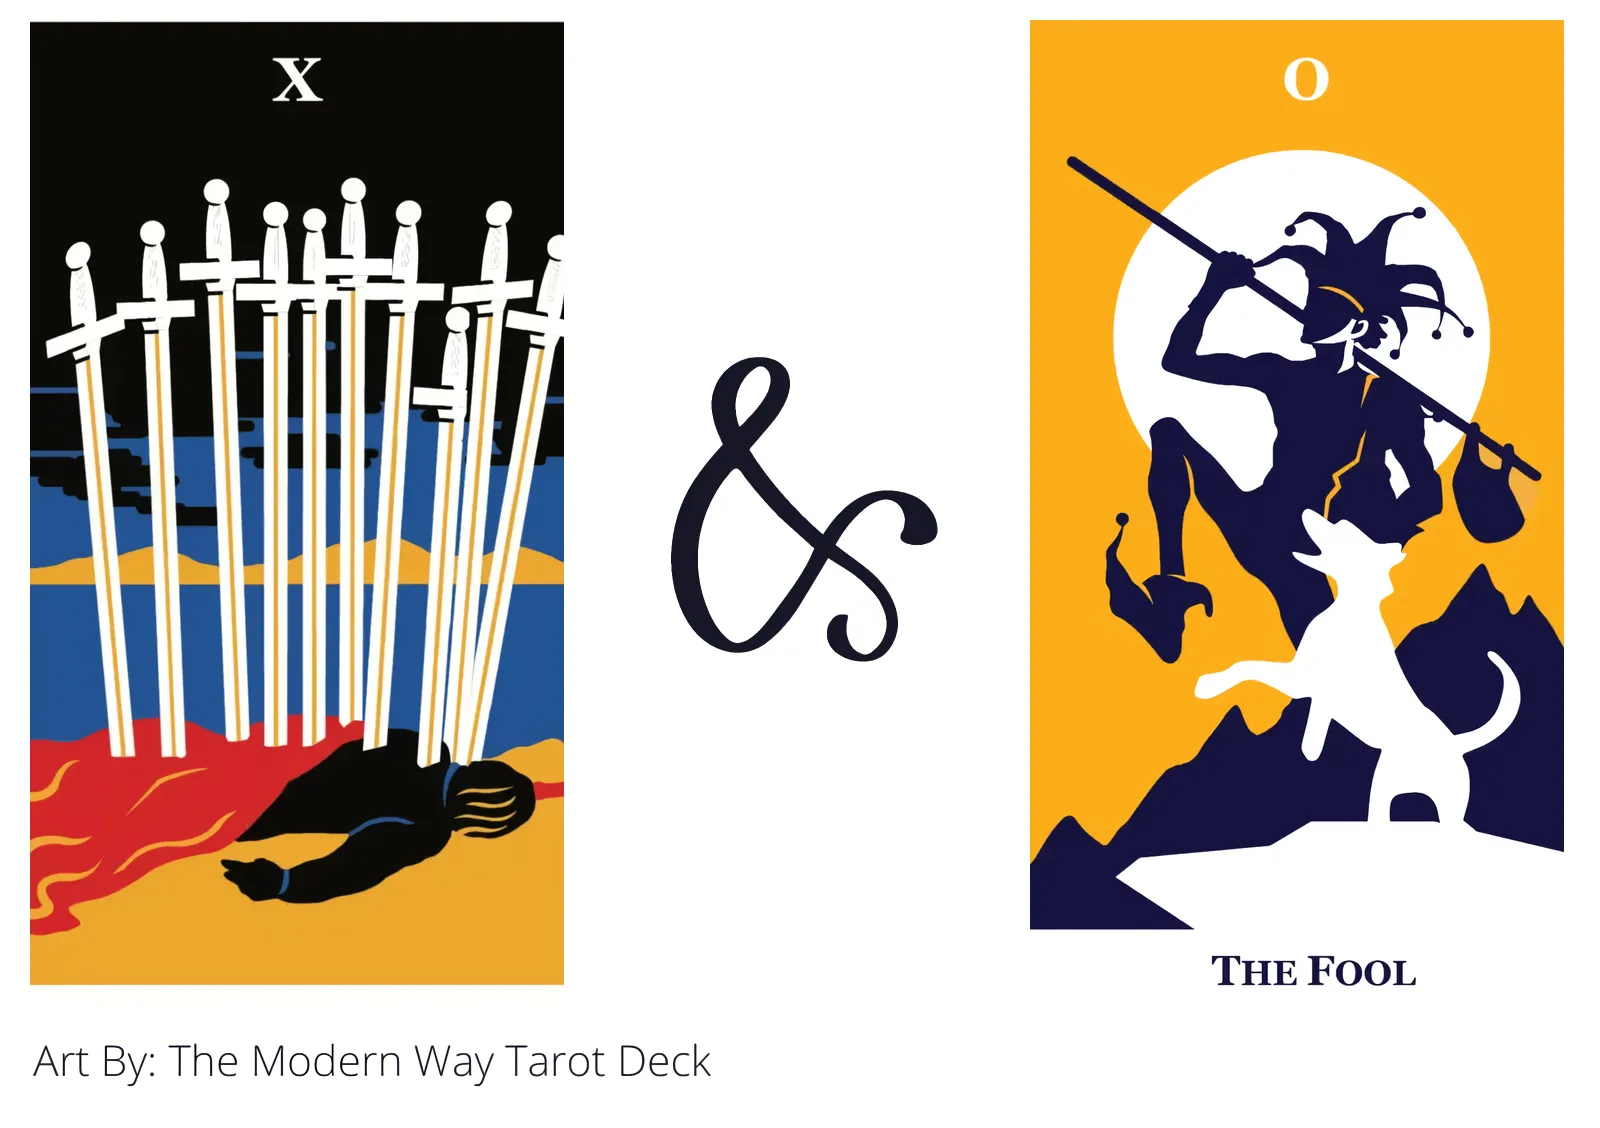 ten of swords and the fool tarot cards together